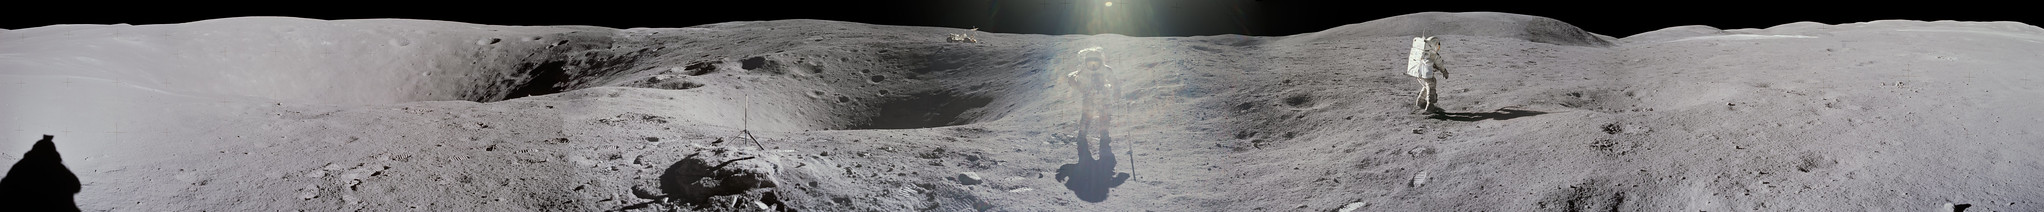 Panorama view of Apollo 16 Lunar surface photos for use in presentations to NASA management and for Outreach Education in regard to new NASA initiative for human planetary research. Photo numbers used for this panoramic include: Apollo 16 start frame AS16-114-18416 thru end frame AS16-114-18431.